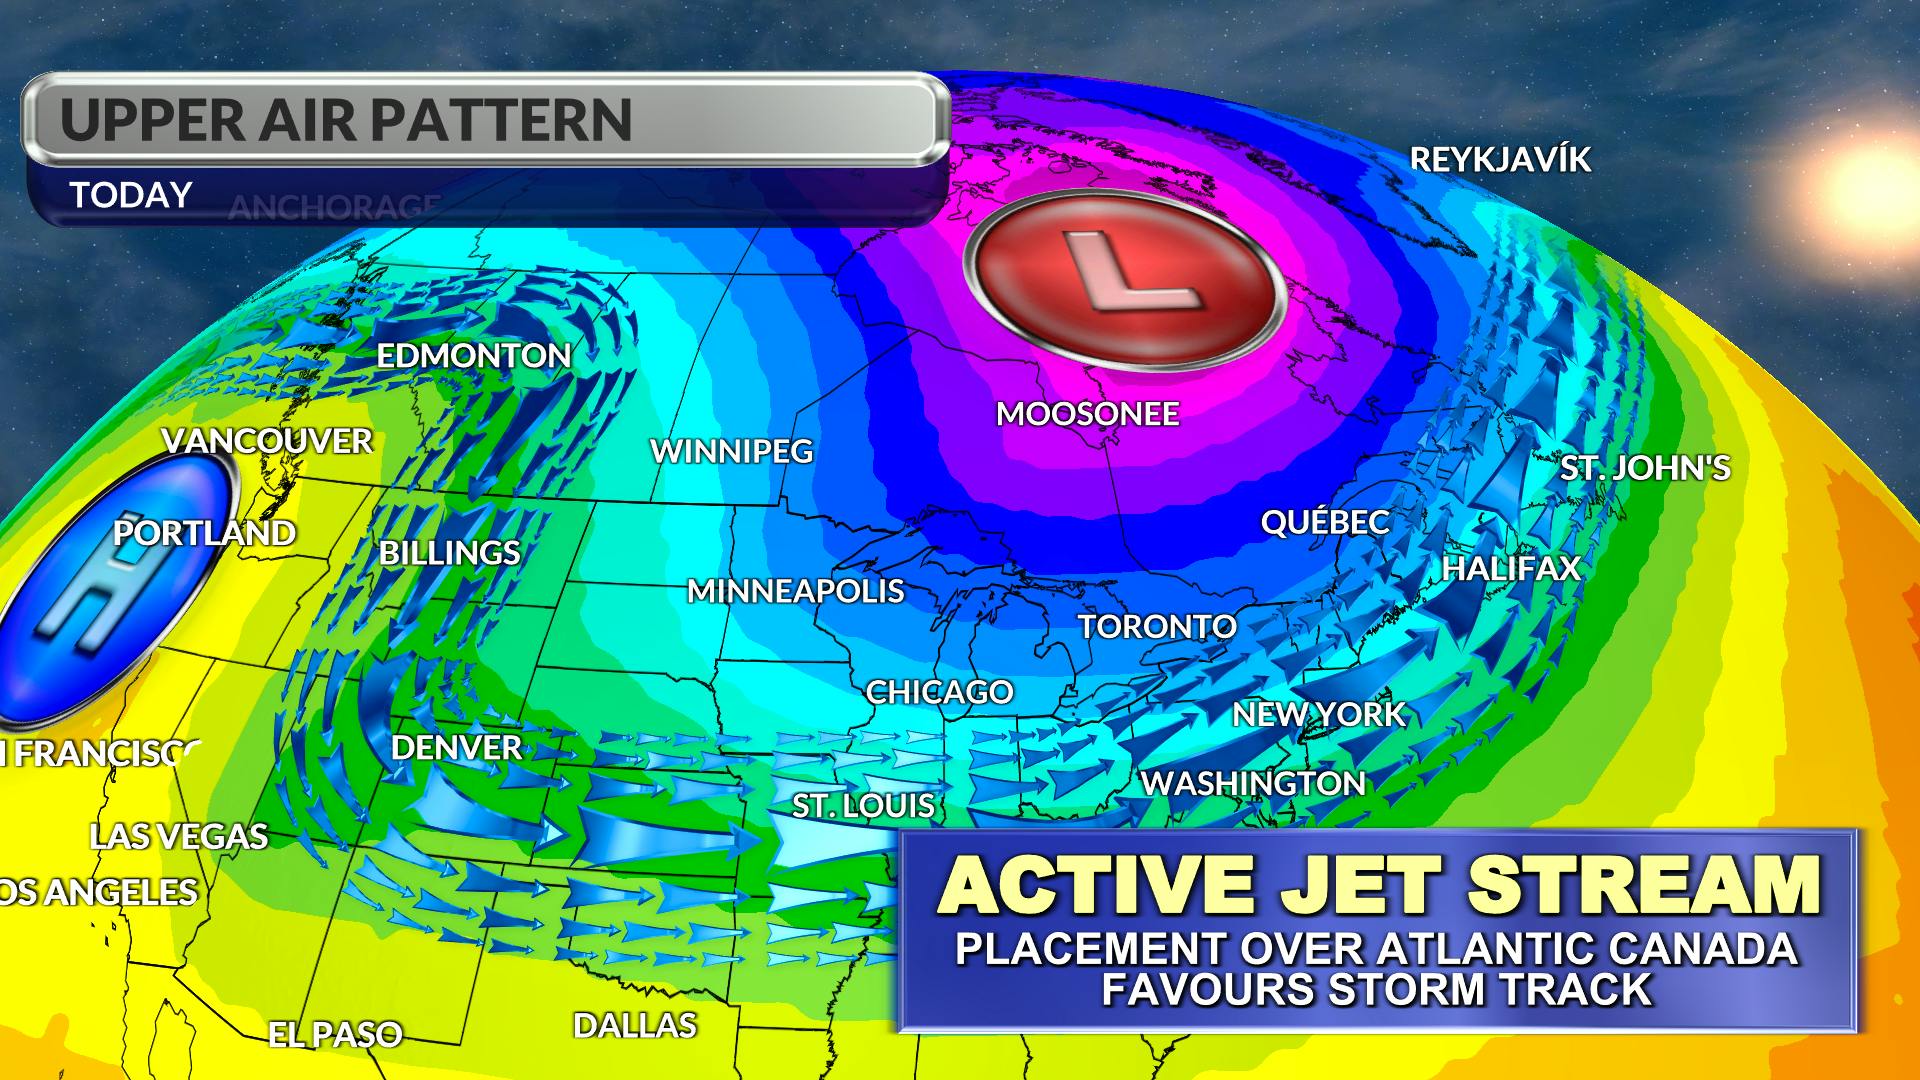 Jet stream and upper air pattern on Tuesday - WSI